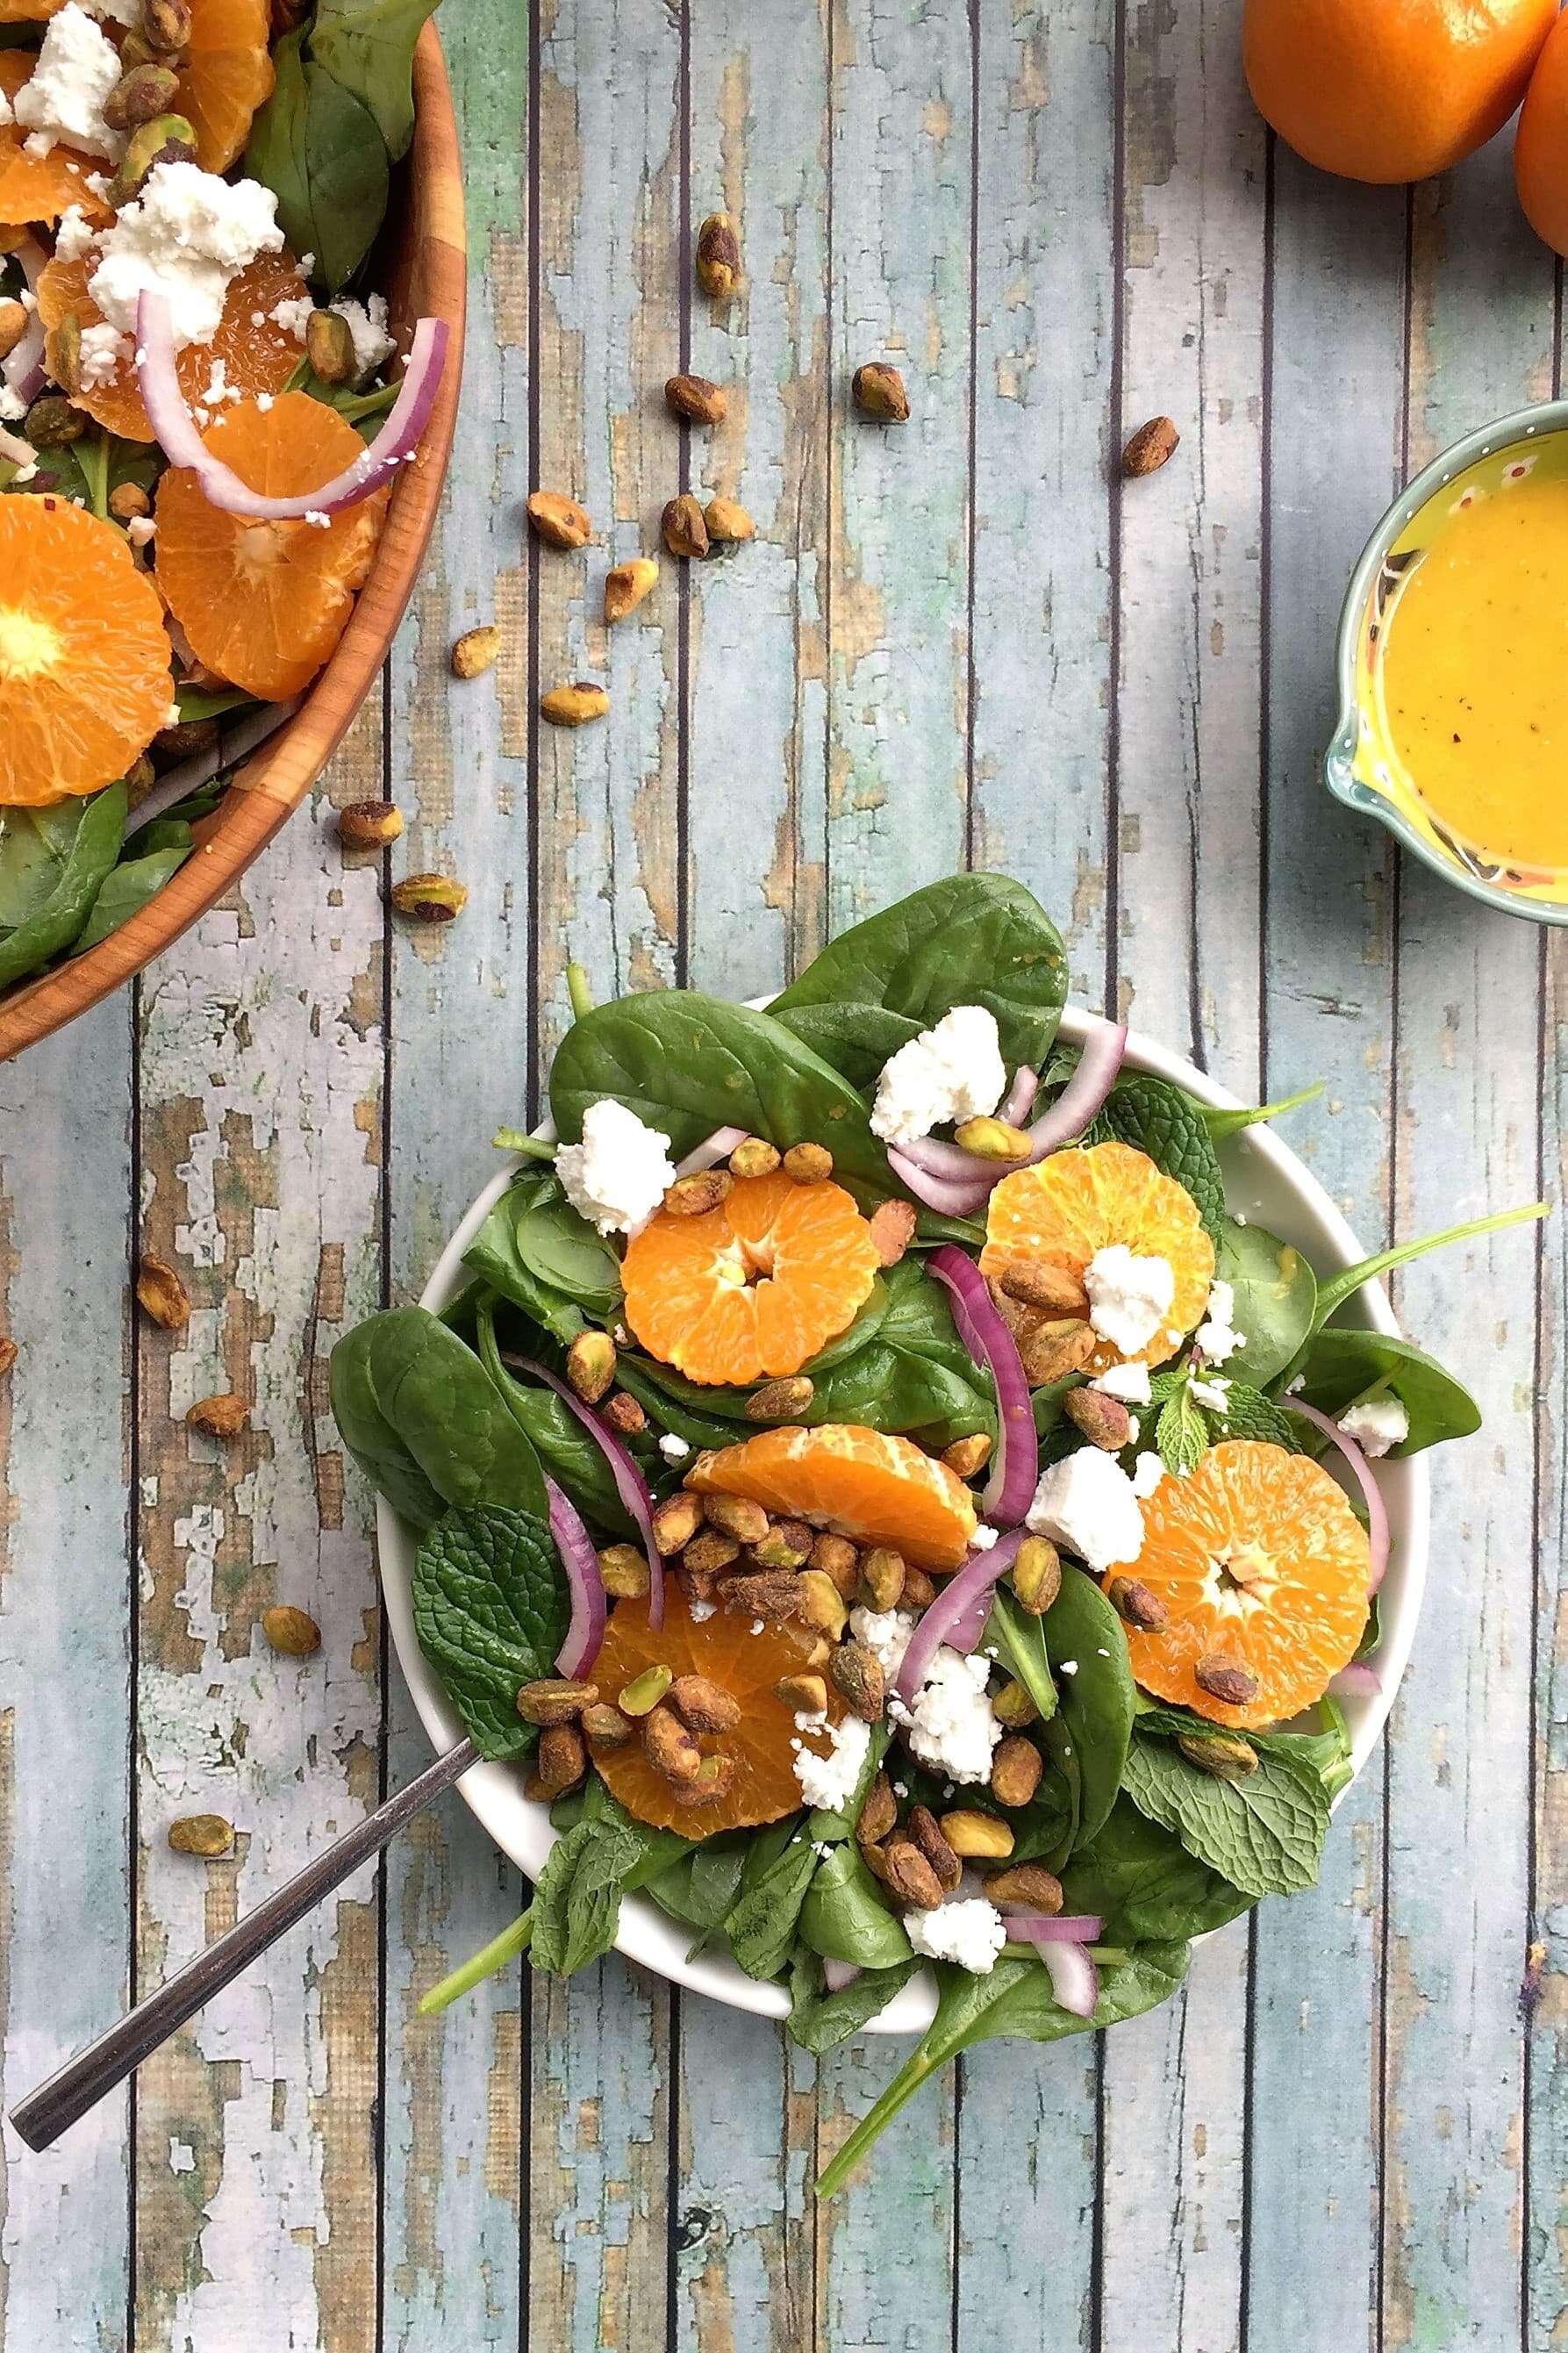 Links to Spinach Salad with Wonderful Pistachios, Halos, Goat Cheese, and Mint recipe